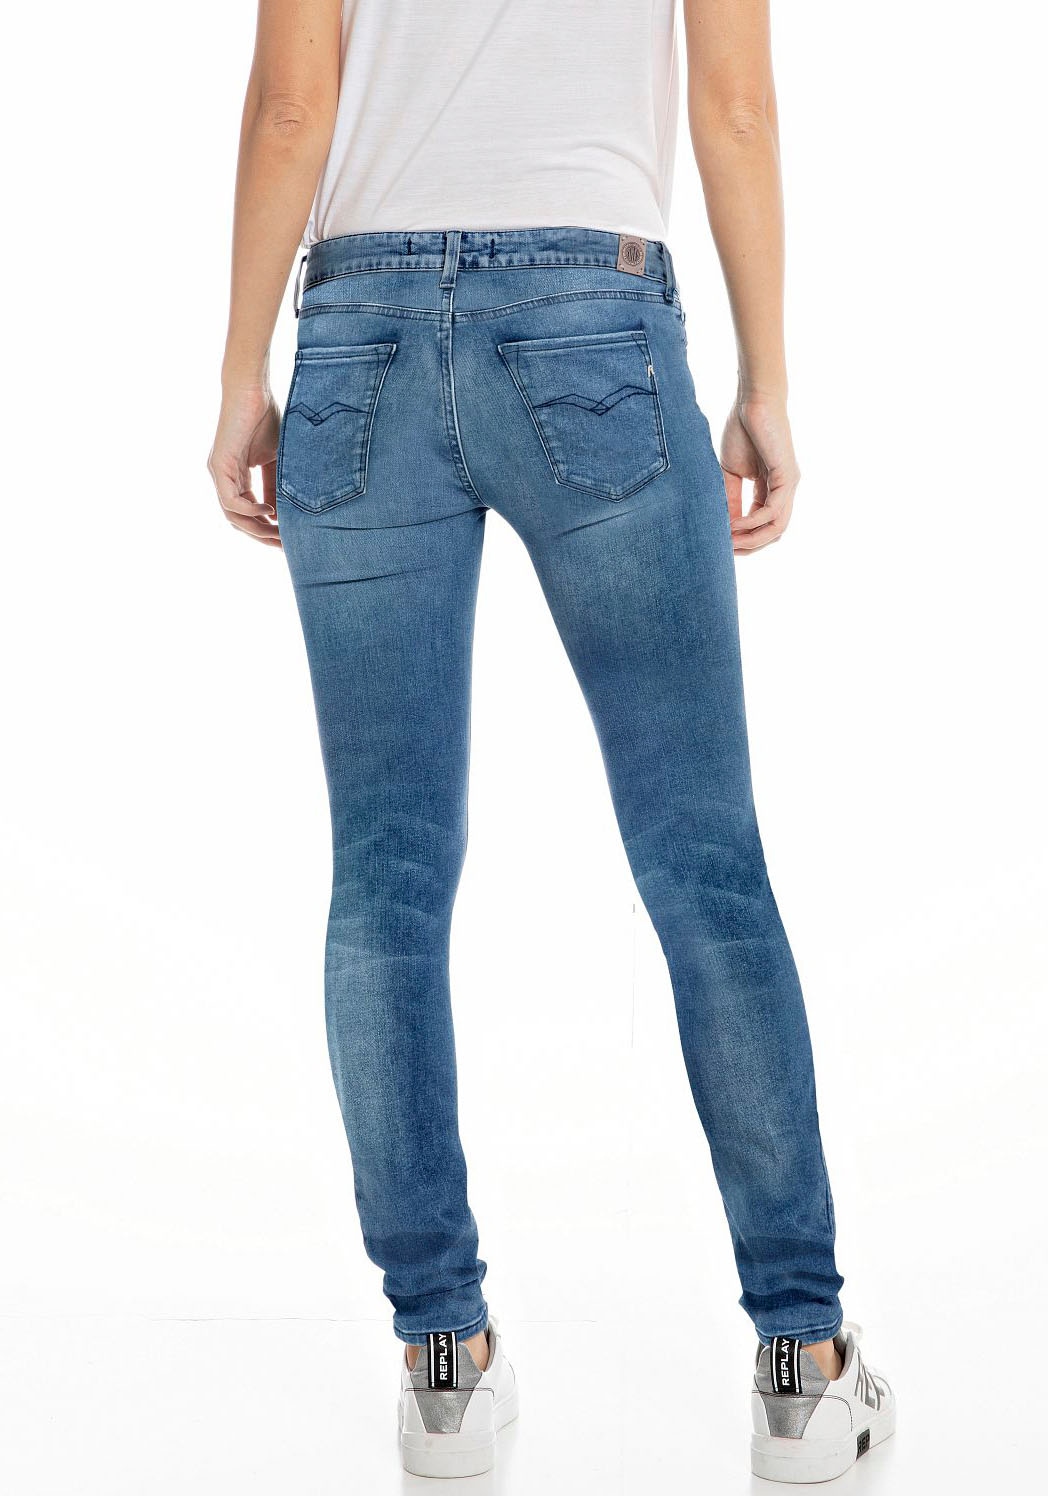 Replay Skinny-fit-Jeans »NEW LUZ«, in Ankle-Länge online kaufen